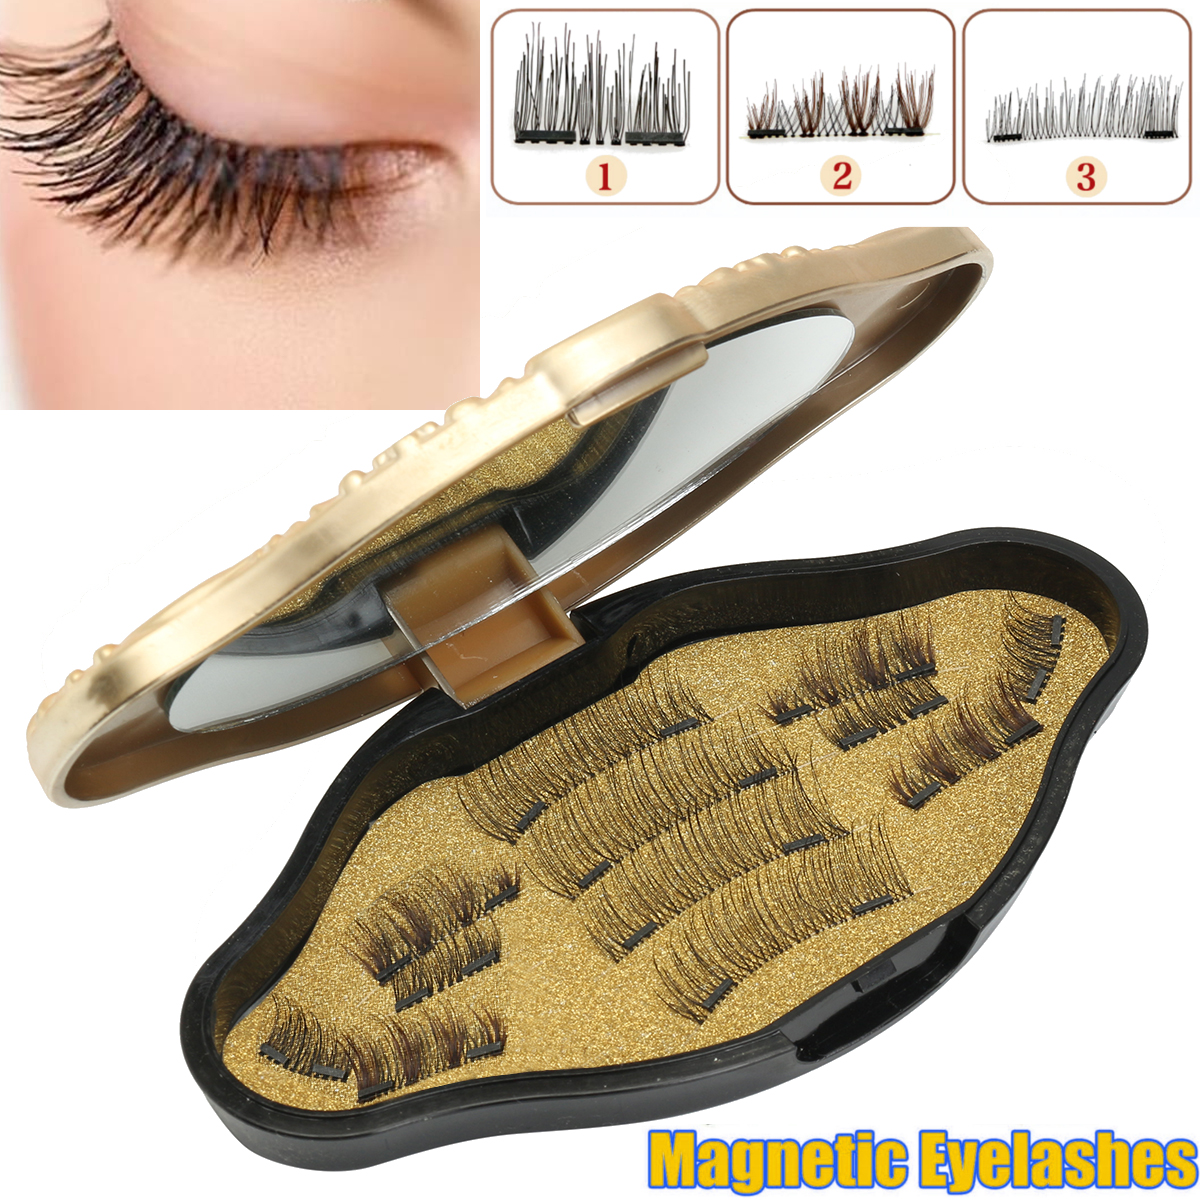 3-Style-Magnetic-Eyelashes-Makeup-Reusable-Long-Natural-Eyelashes-Extension-With-Mirror-1242835